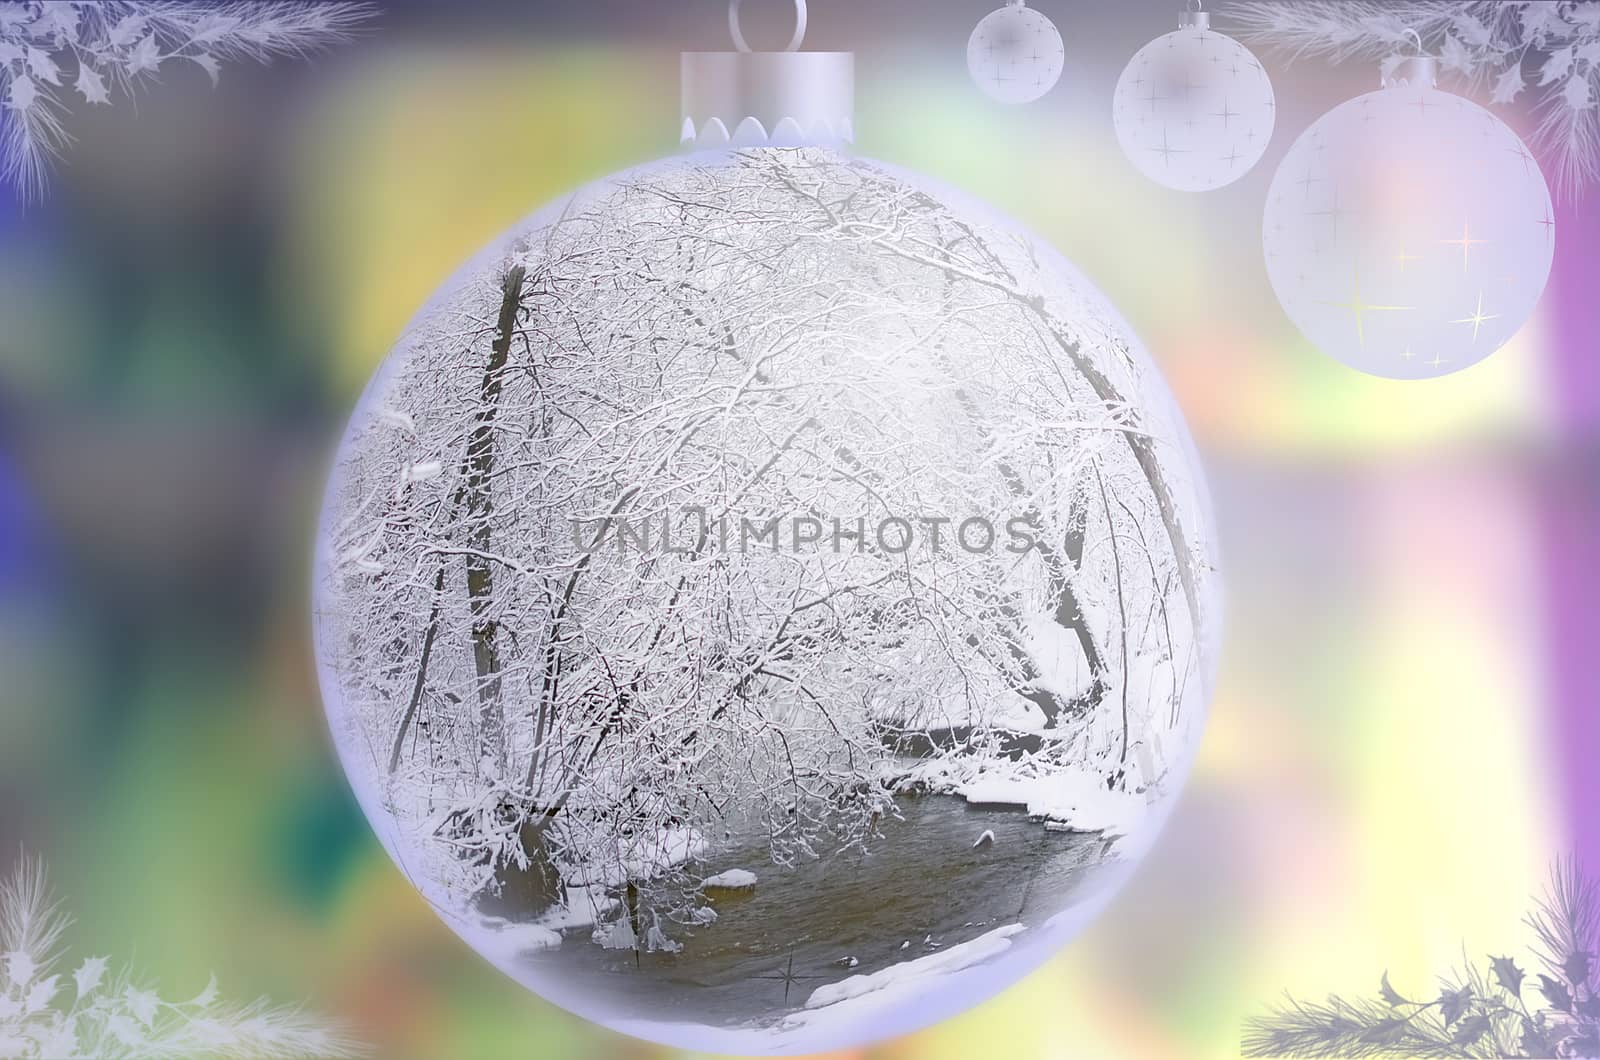 Christmas magic glass ball on blurred background. Cozy winter holiday concept. Christmas and new year decorations, ornaments. Holiday greeting card.